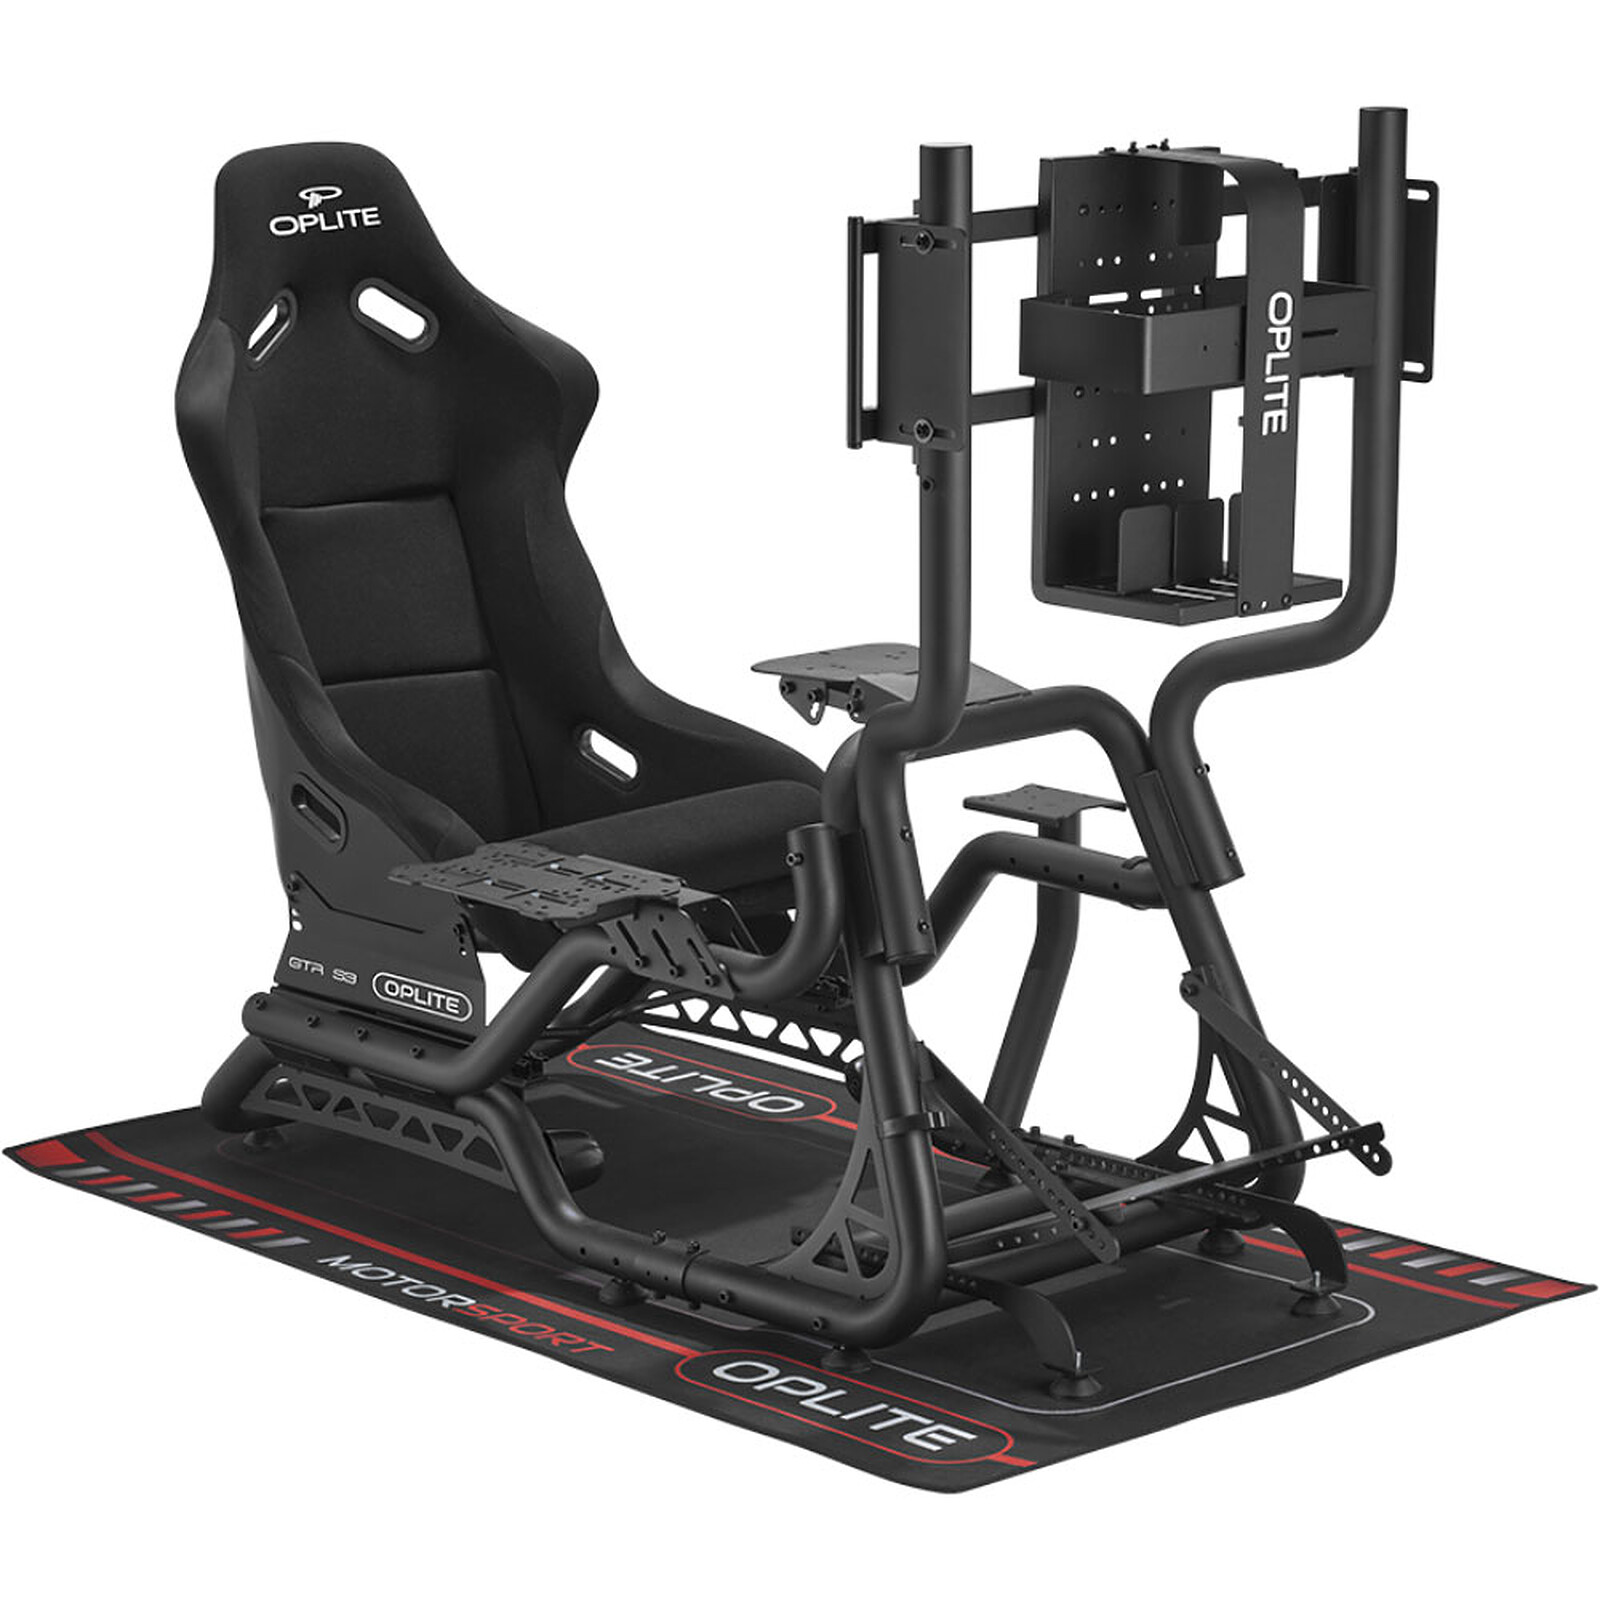 OPLITE GTR Universal Console Mount - Other gaming accessories - LDLC 3-year  warranty